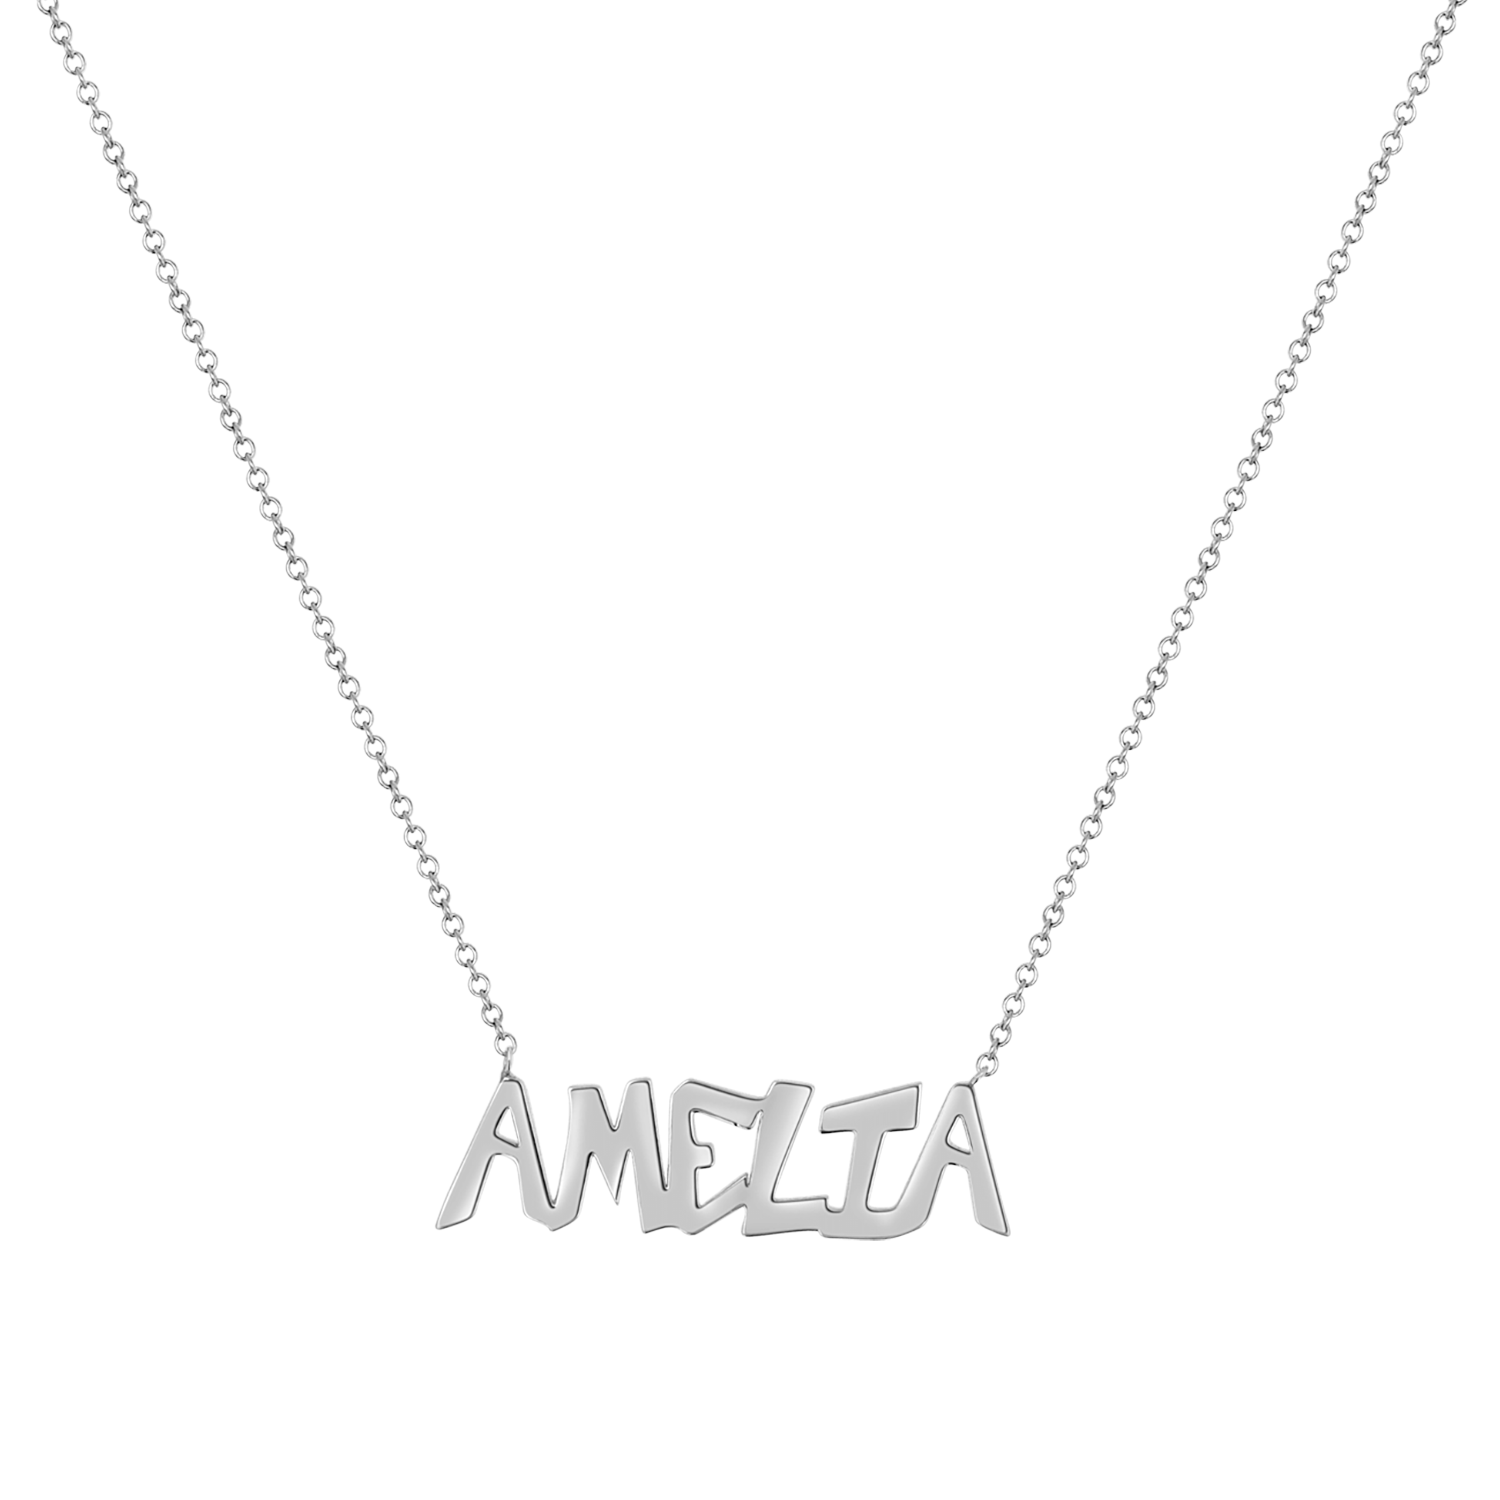 white gold name pendant necklace, personalized necklace for women, graffti name necklace